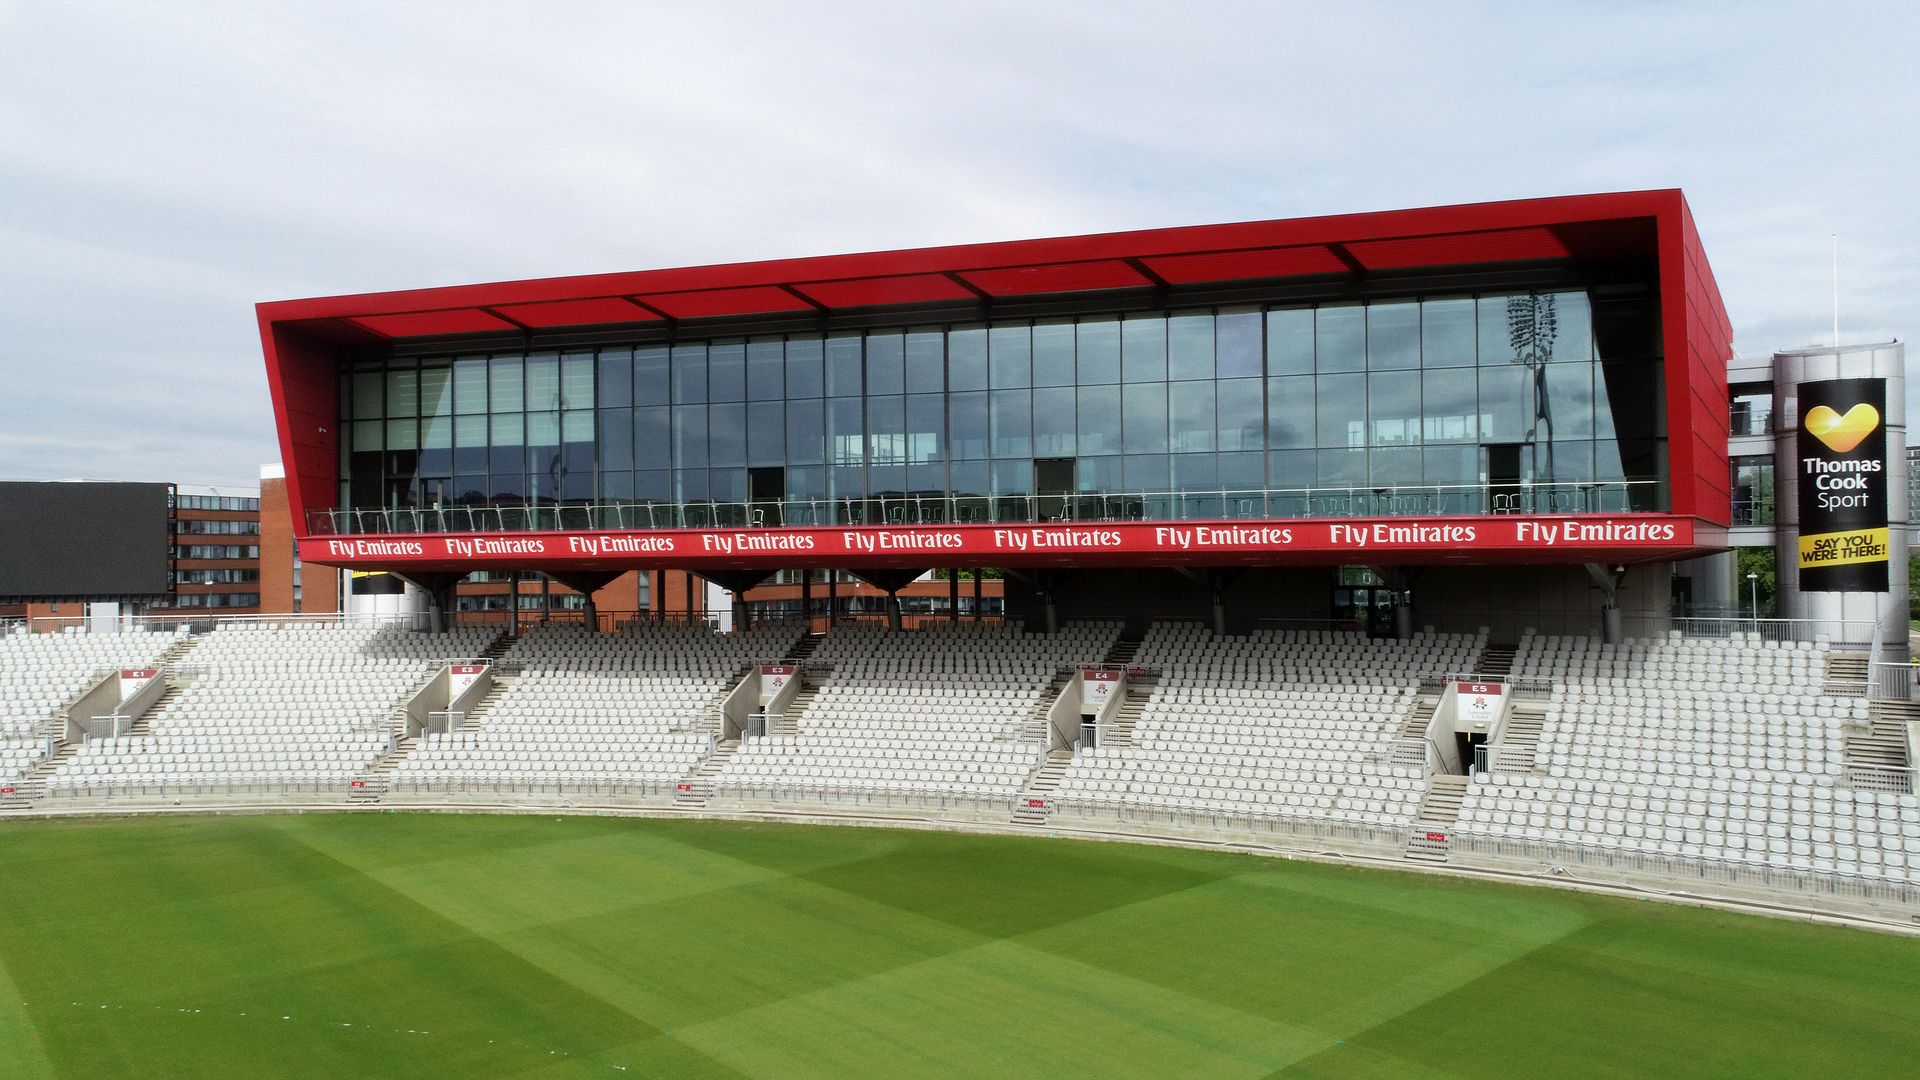 The Point at Old Trafford cricket ground